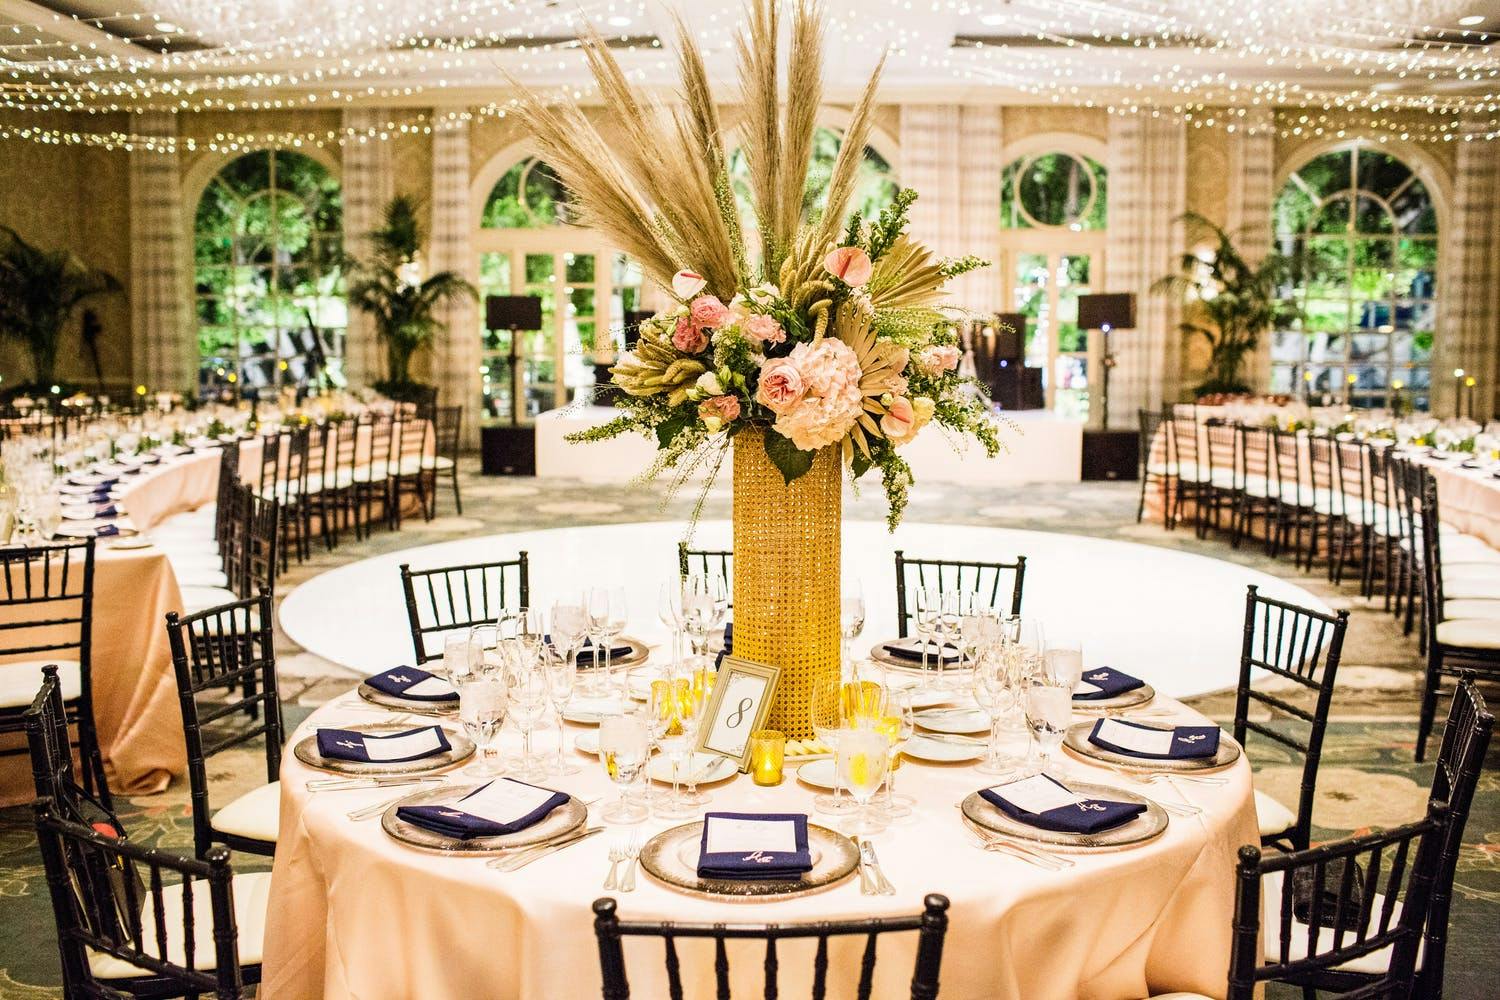 Ballroom with exposed brick and floor to ceiling windows in backdrop. Forefront of photo shows a round banquet table in peach linen with a boho-vibe centerpiece consisting of a wicker vase and pampas grass with blooms.